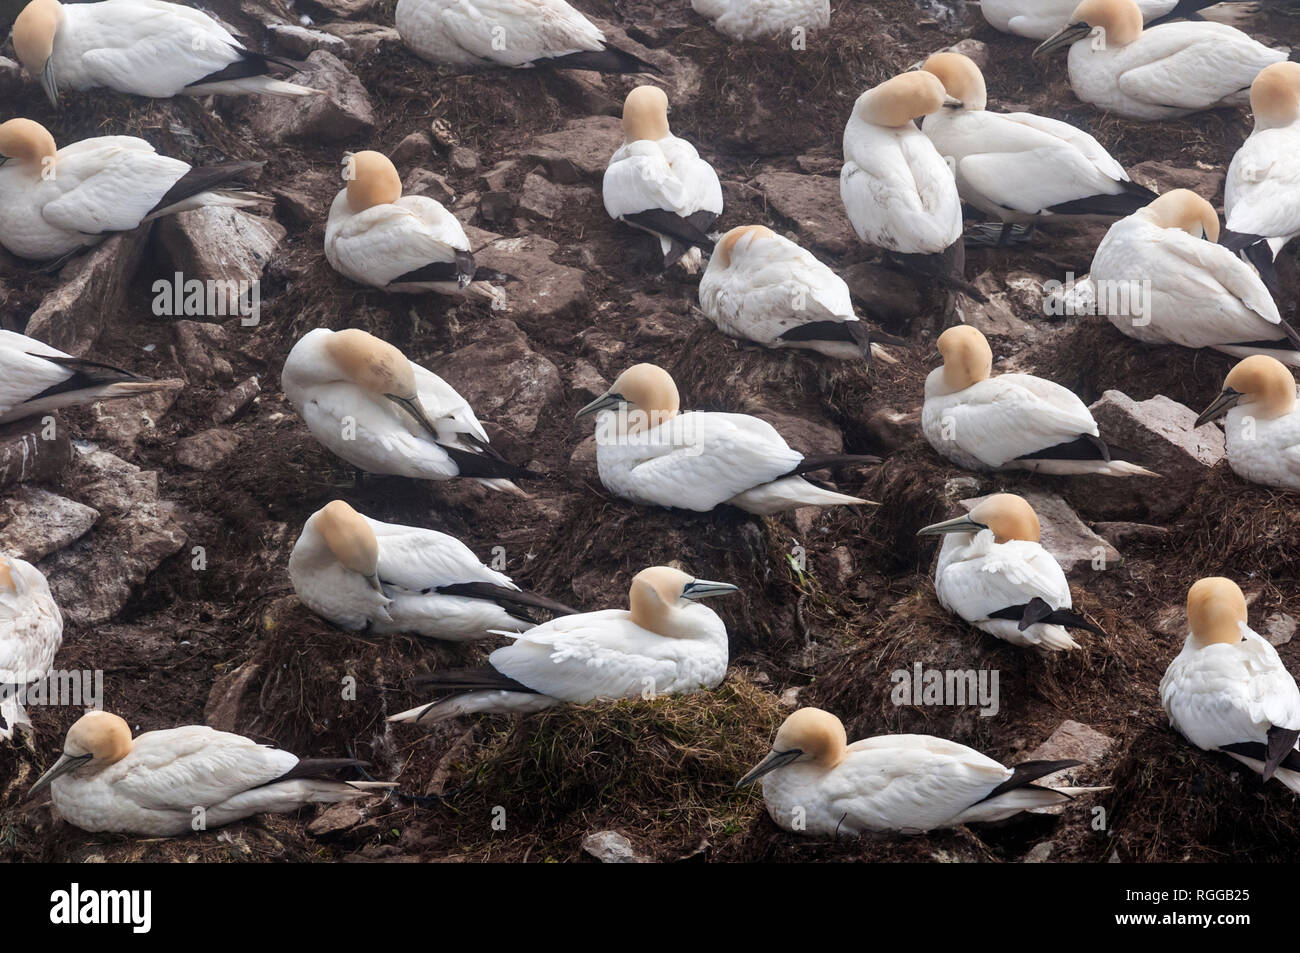 Northern gannets, Morus bassanus, nesting on Bird Rock at the Cape St. Mary's Ecological Reserve breeding colony in Newfoundland, Canada. Stock Photo